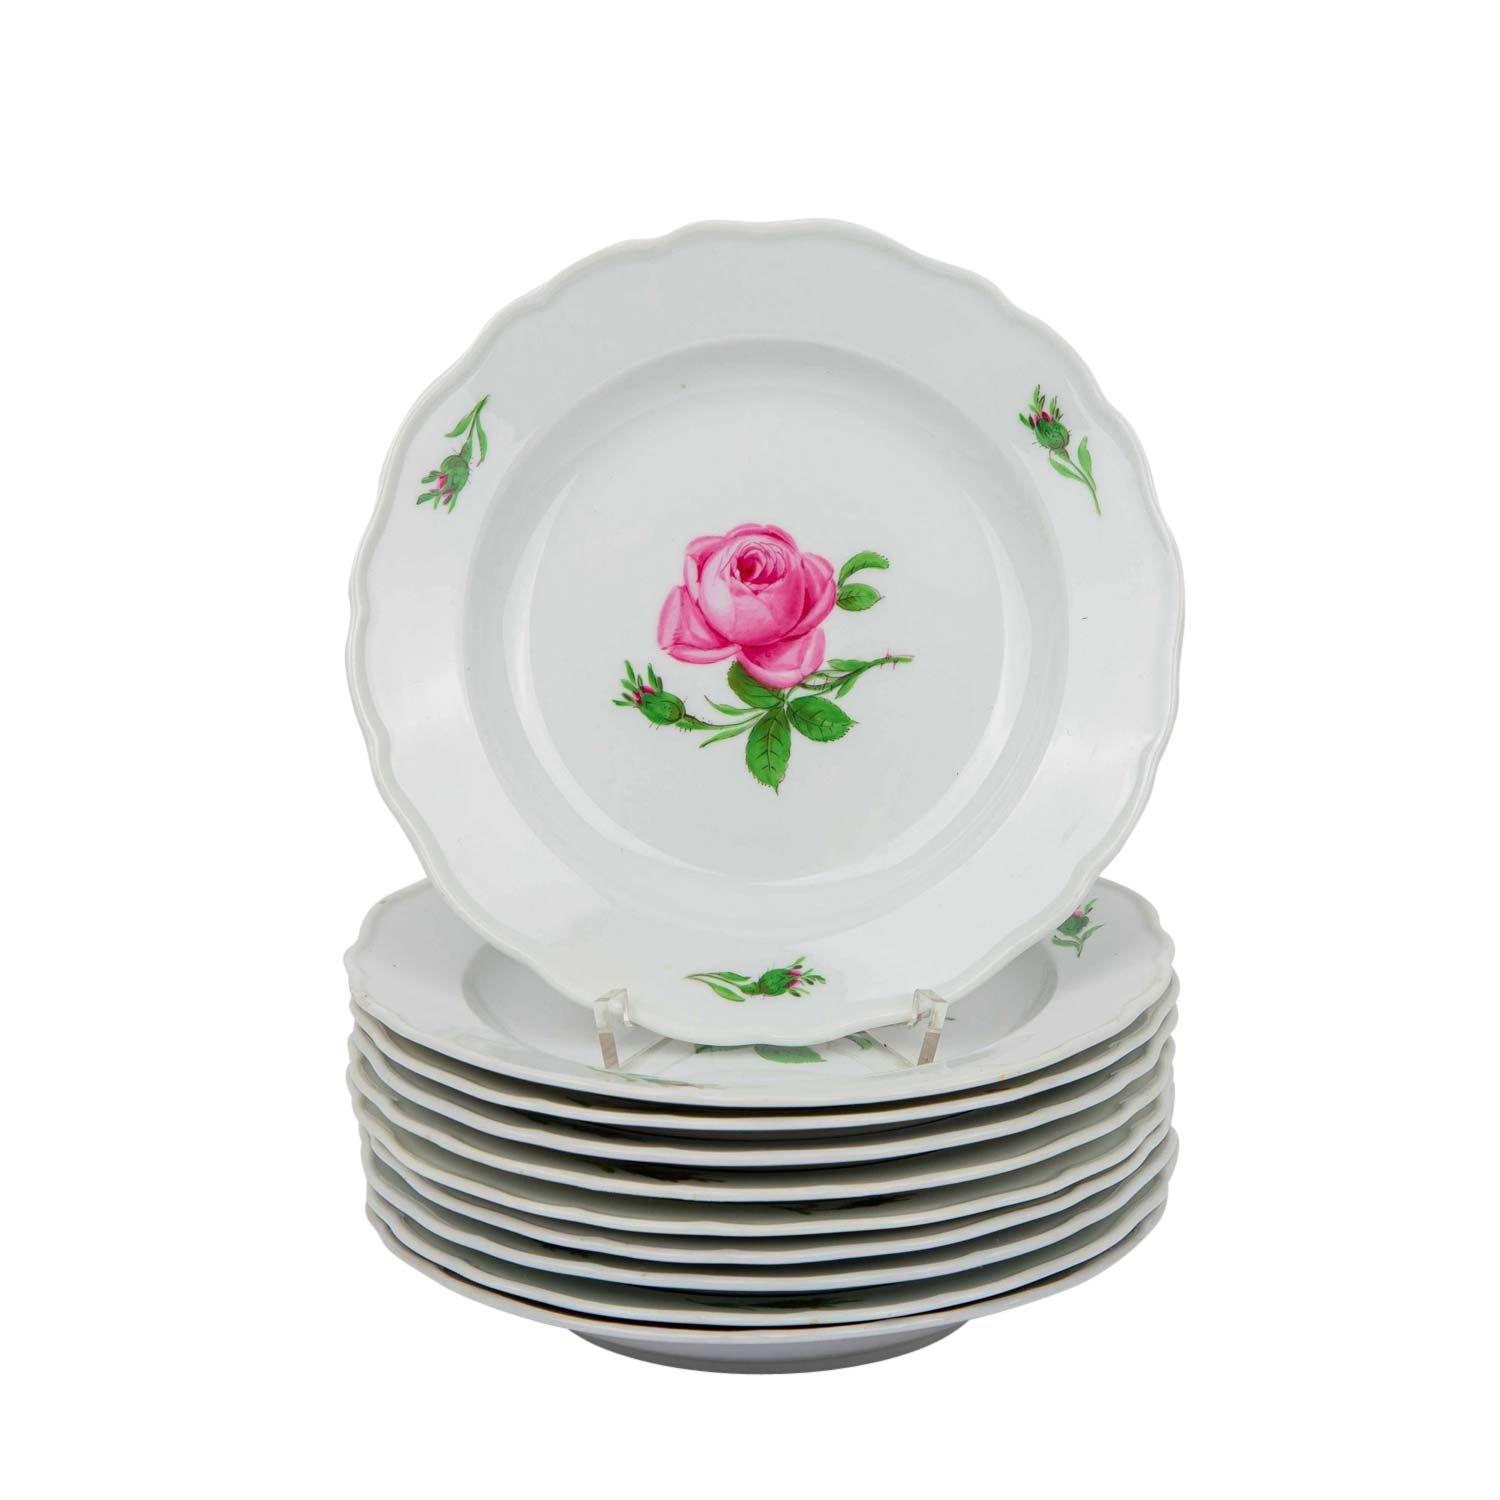 MEISSEN Kaffeeservice f. 10 Personen 'Rote Rose', 2. Wahl, 1924-1934. - Image 2 of 6